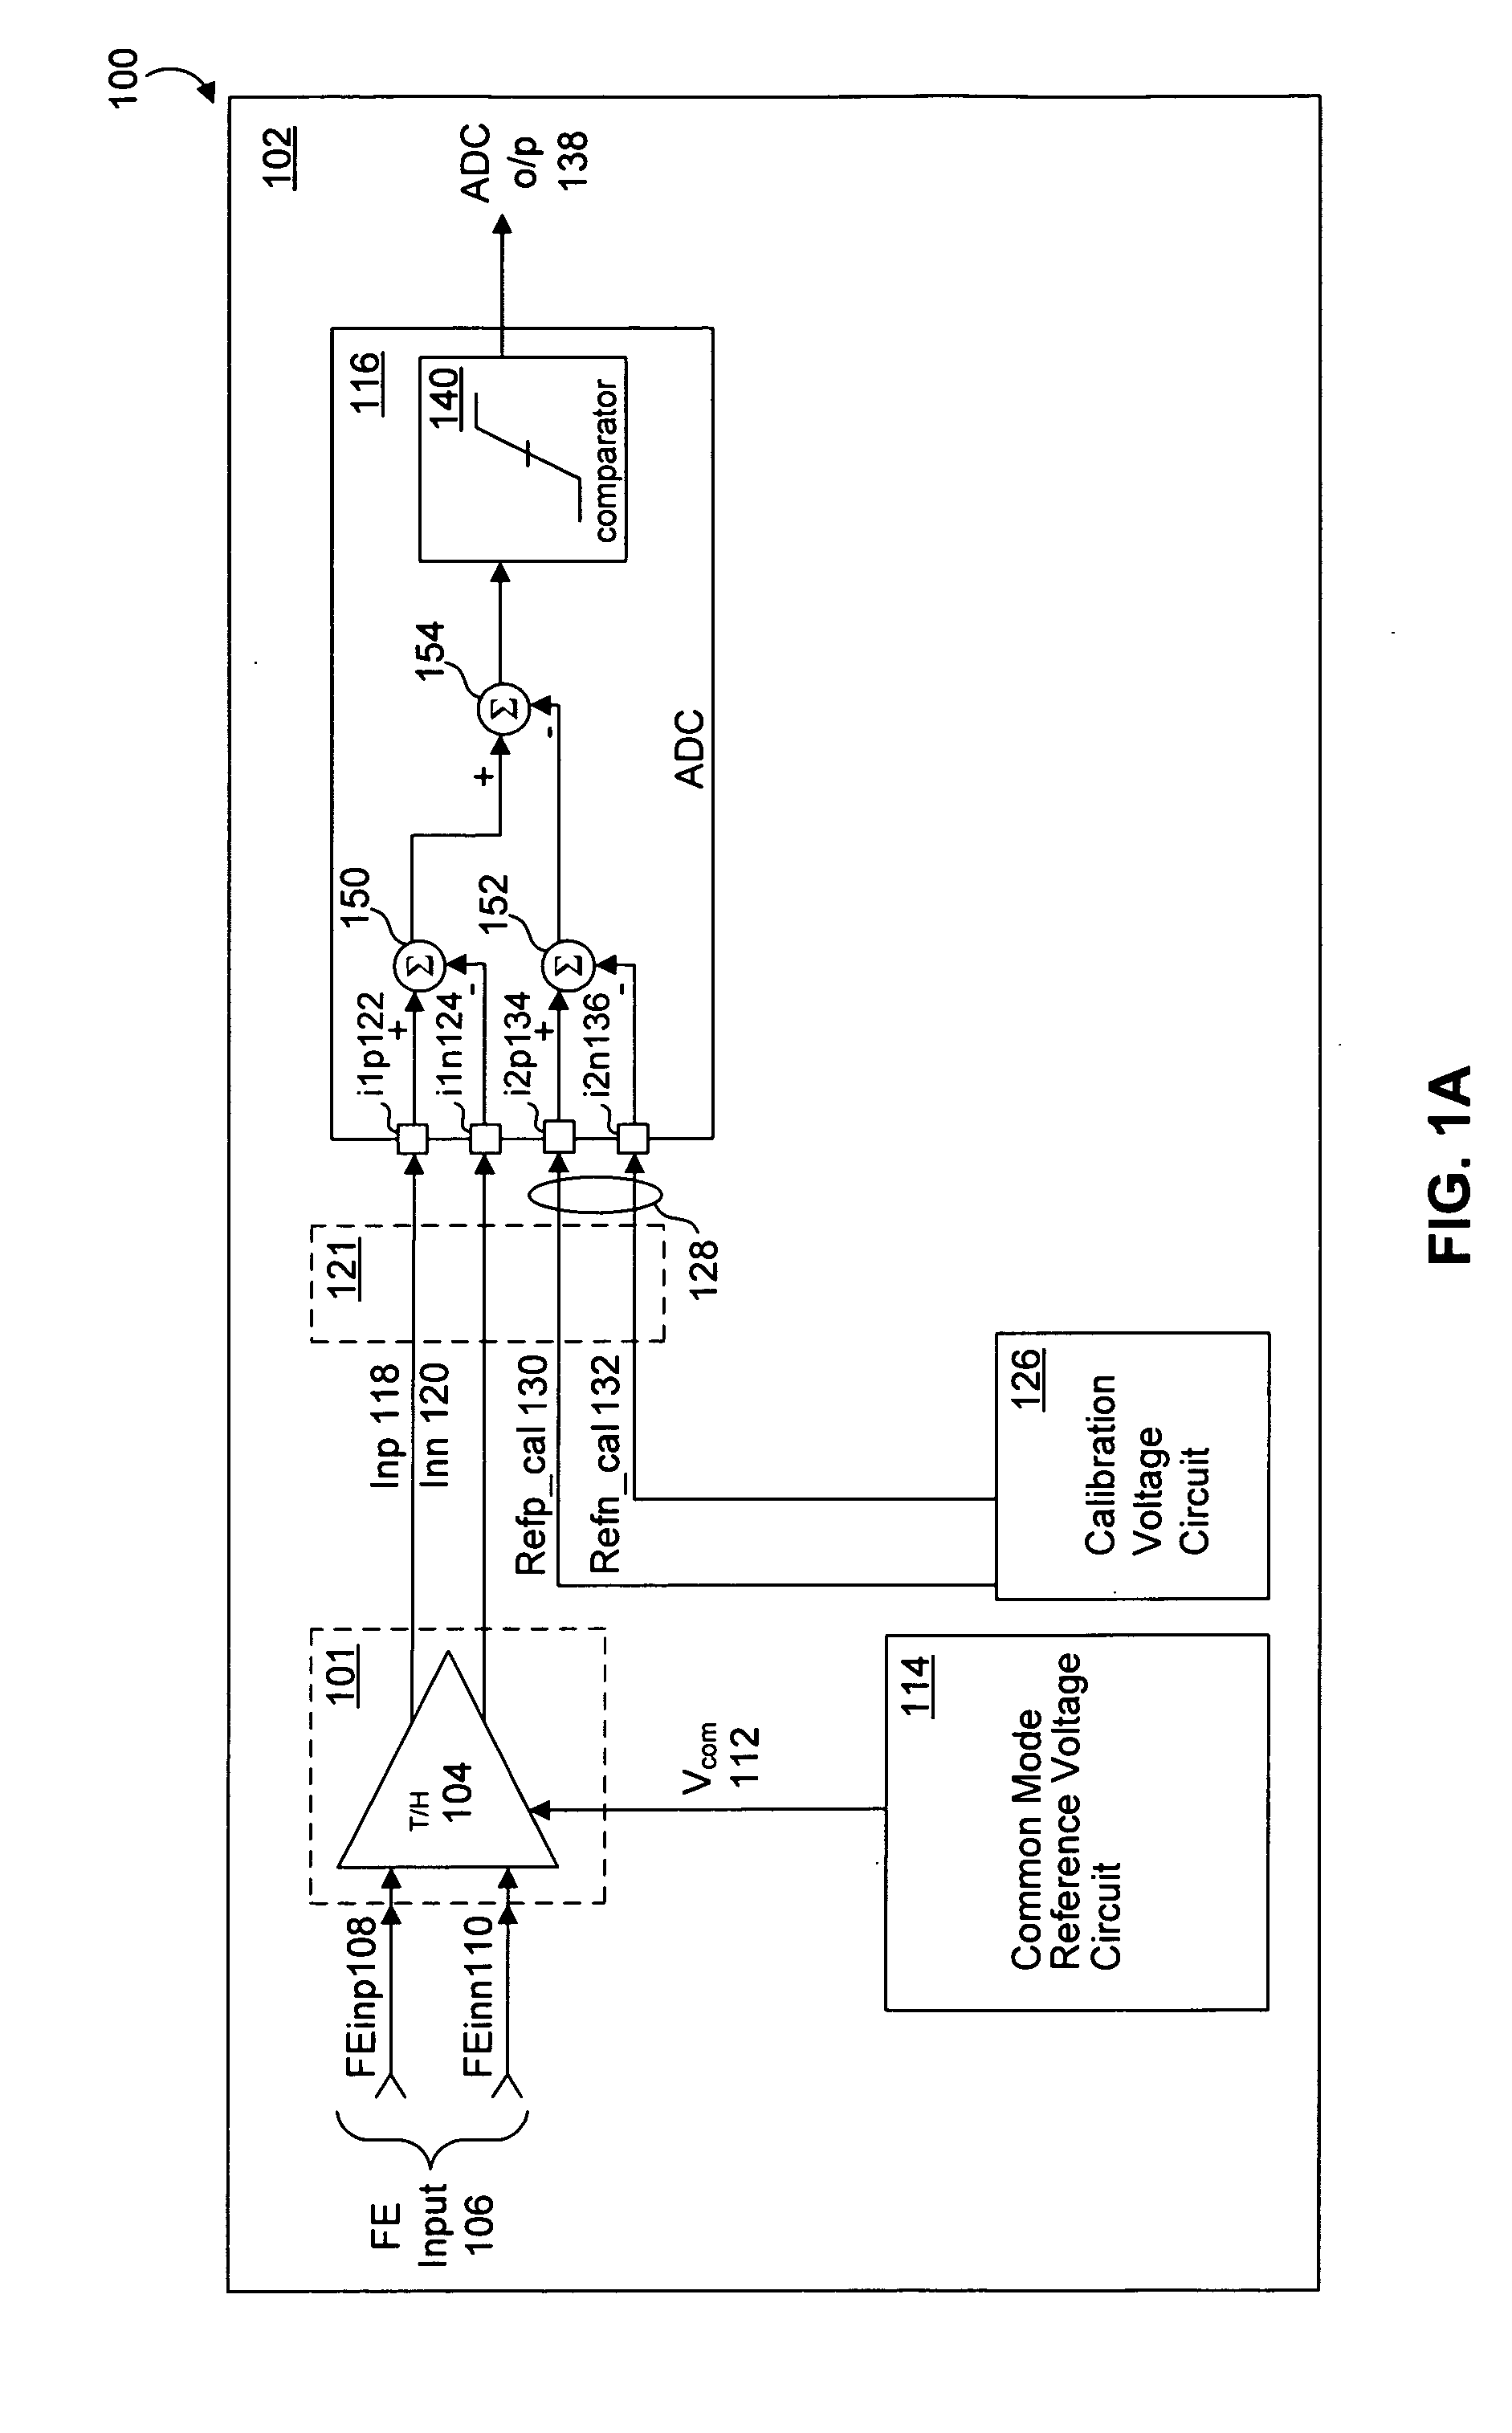 System and method for common mode calibration in an analog to digital converter